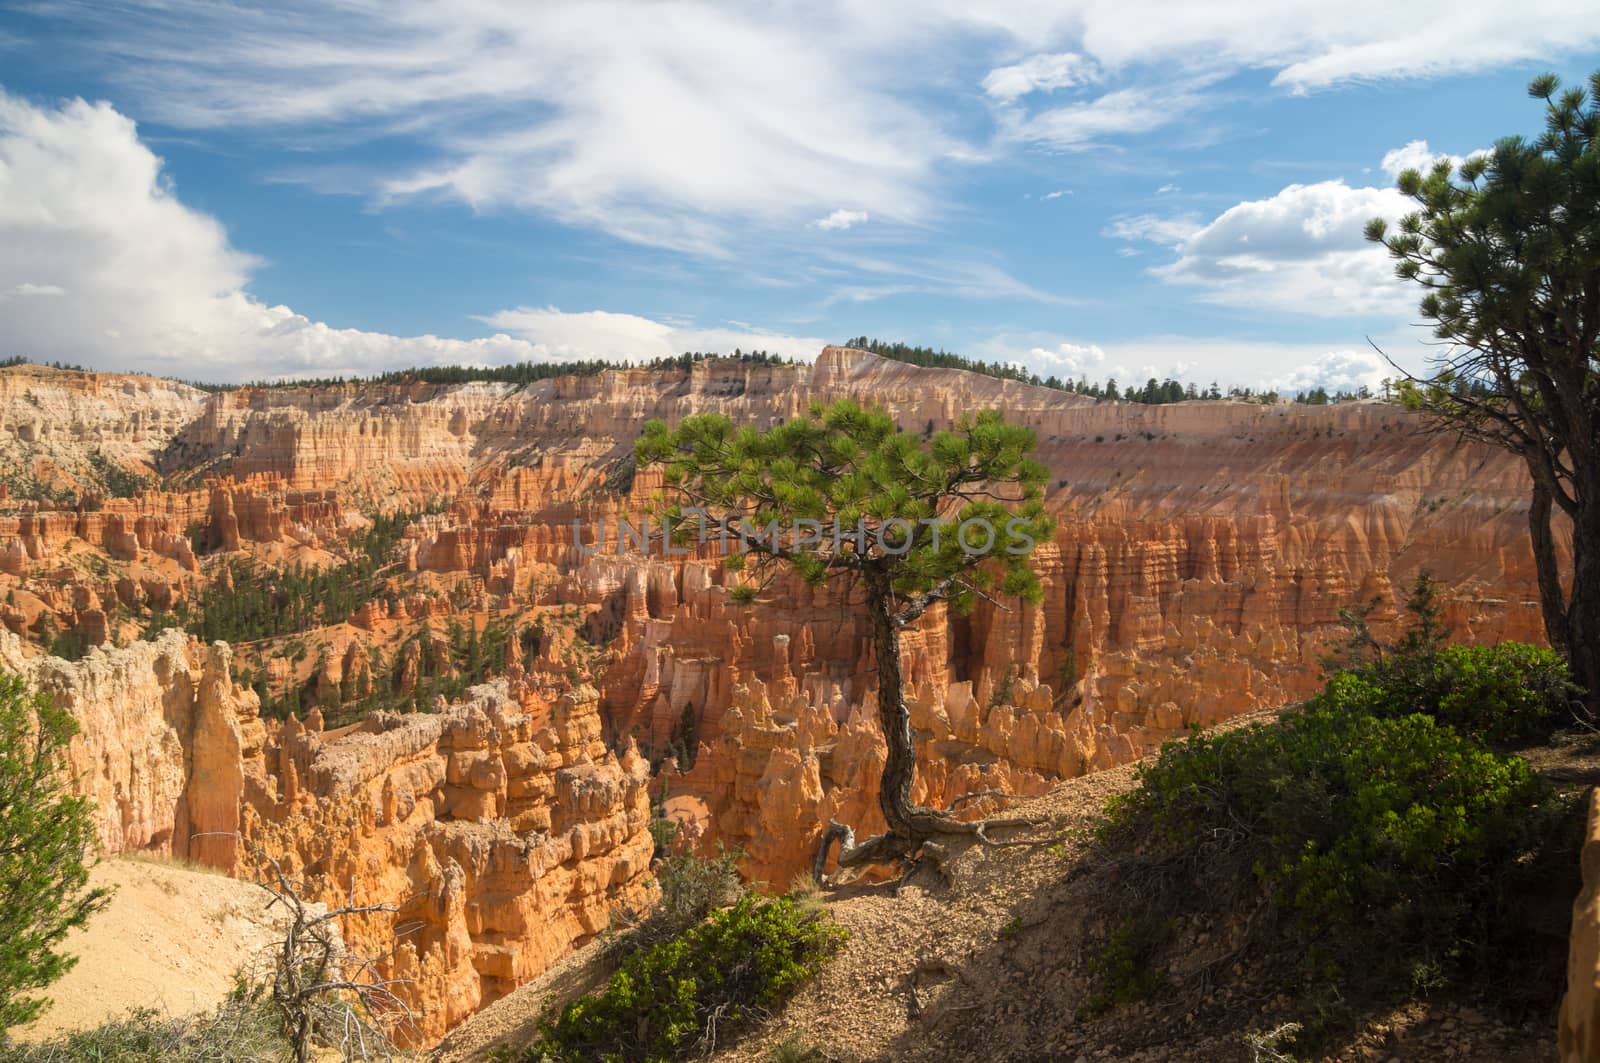 Tree clings to the edge of Bryce Canyon by emattil